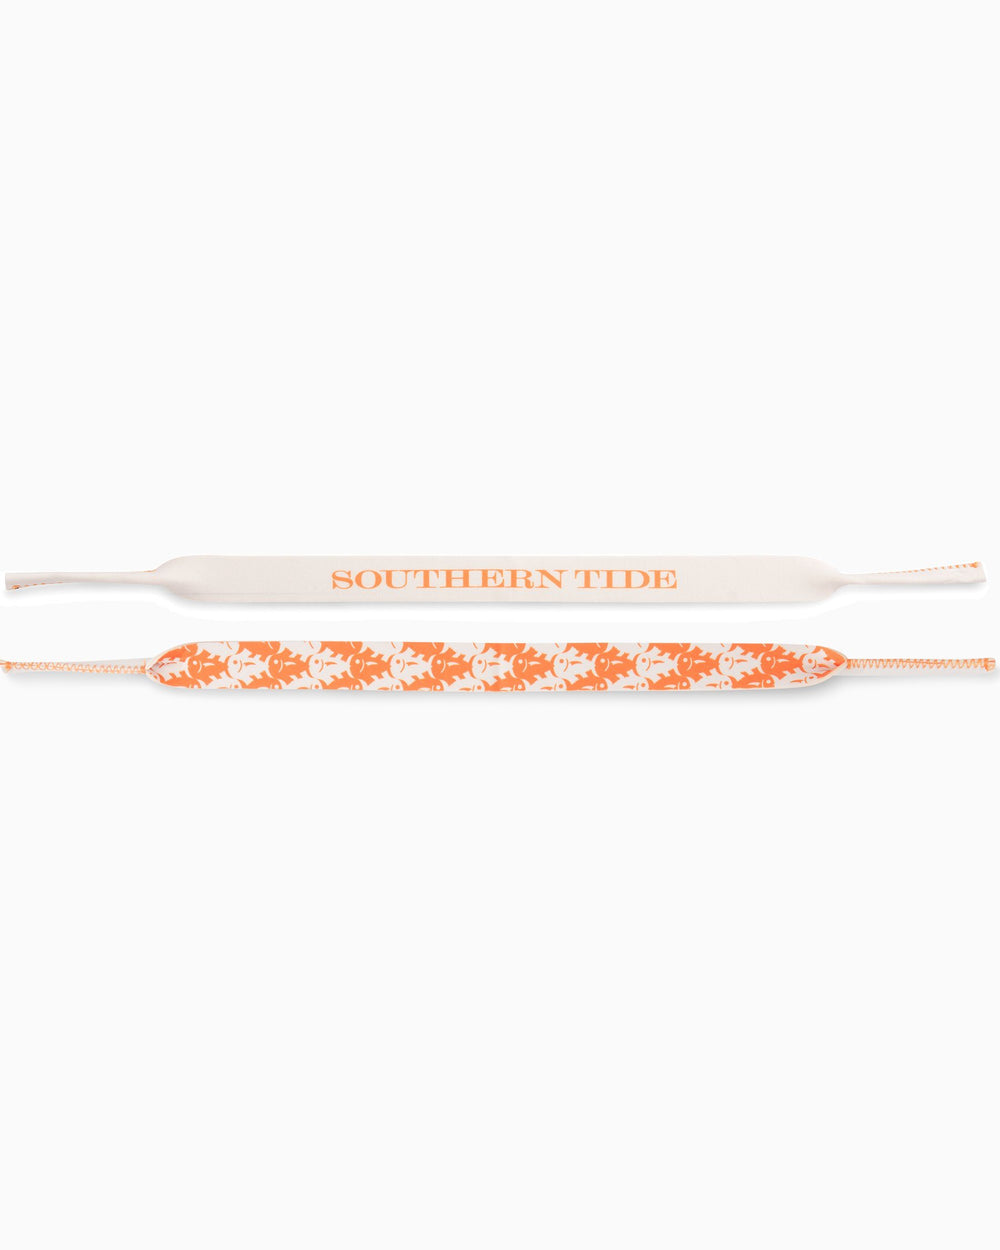 The front view of the Gameday Skipjack Sunglass Straps by Southern Tide - Rocky Top Orange and White